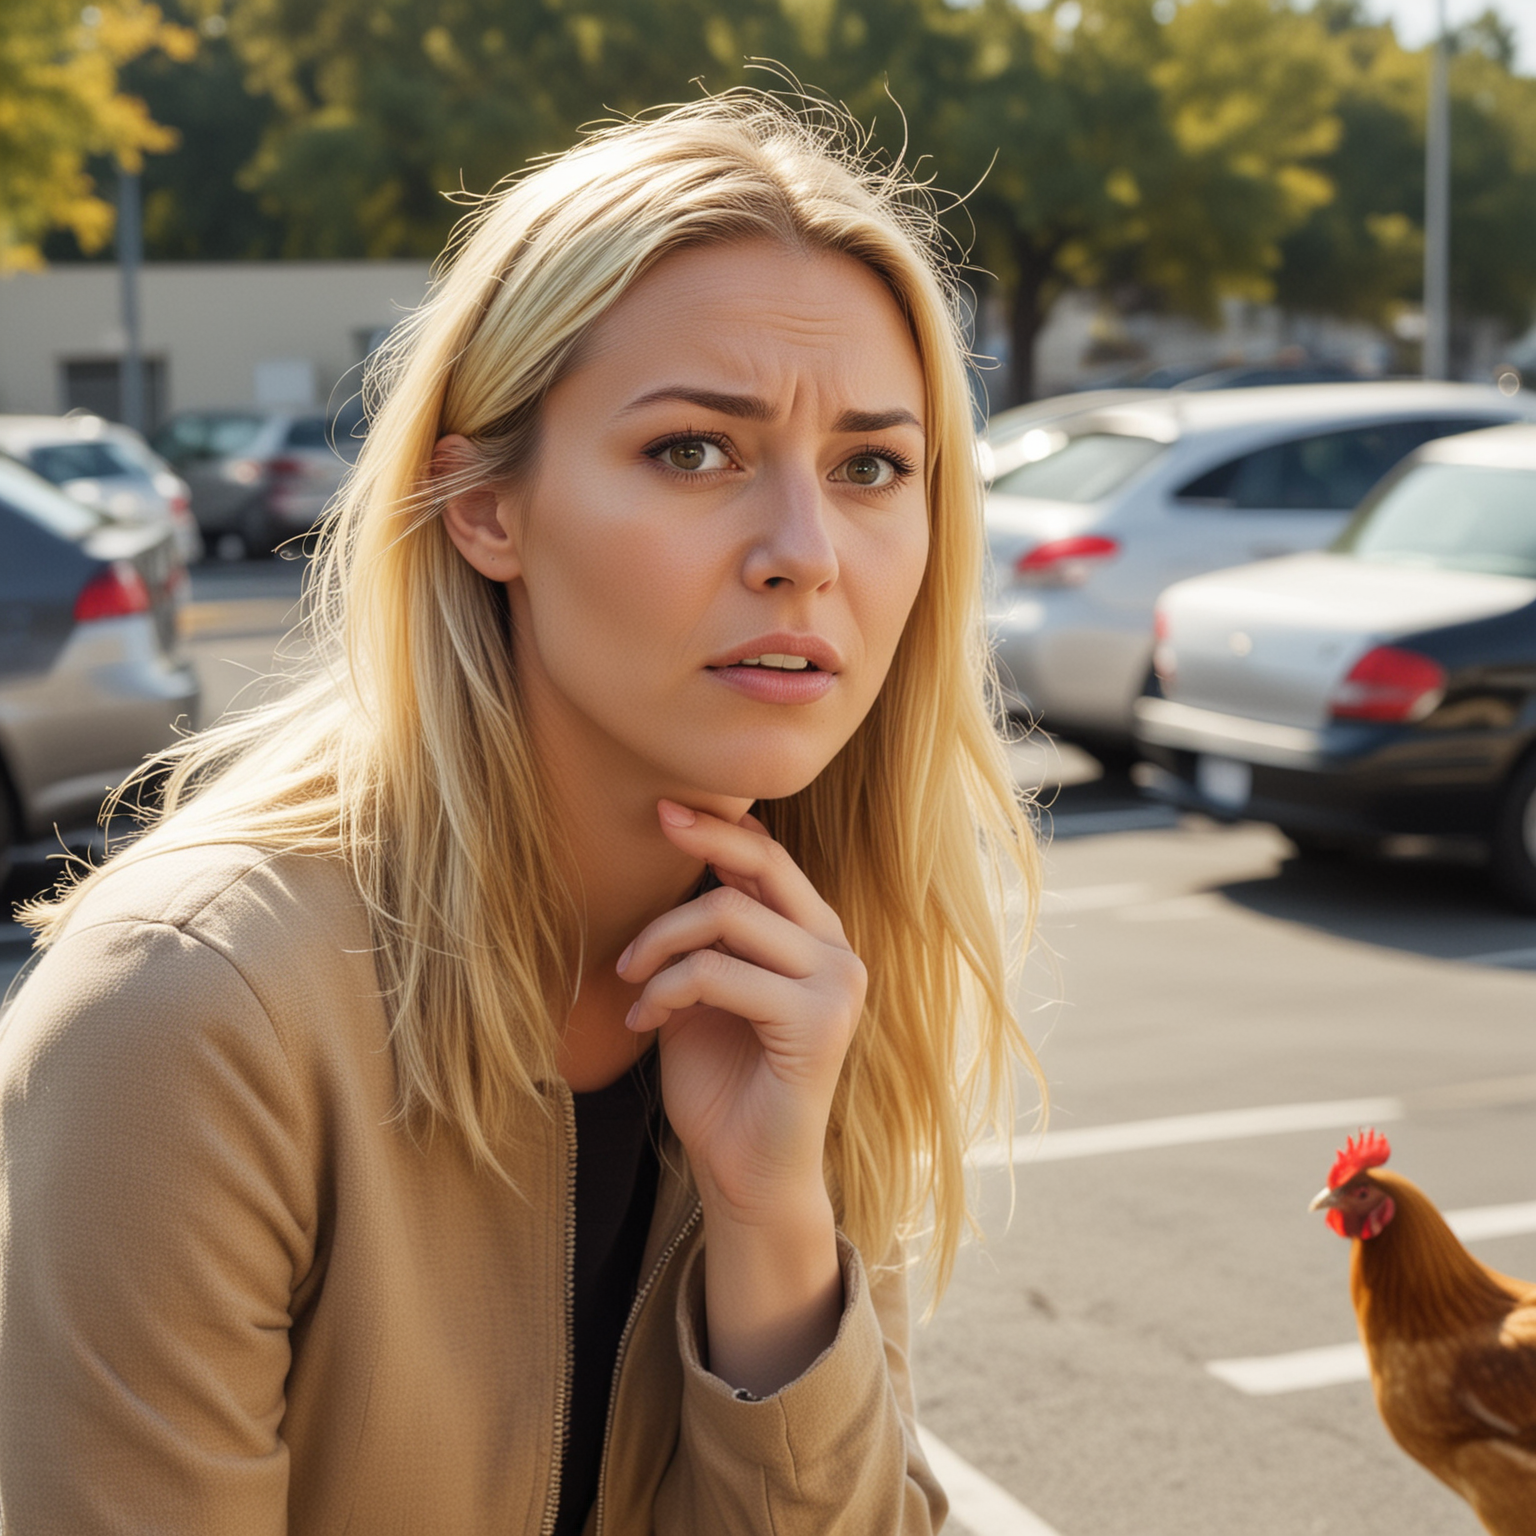 Blonde Woman with Confused Expression Observing Chicken in Parking Lot